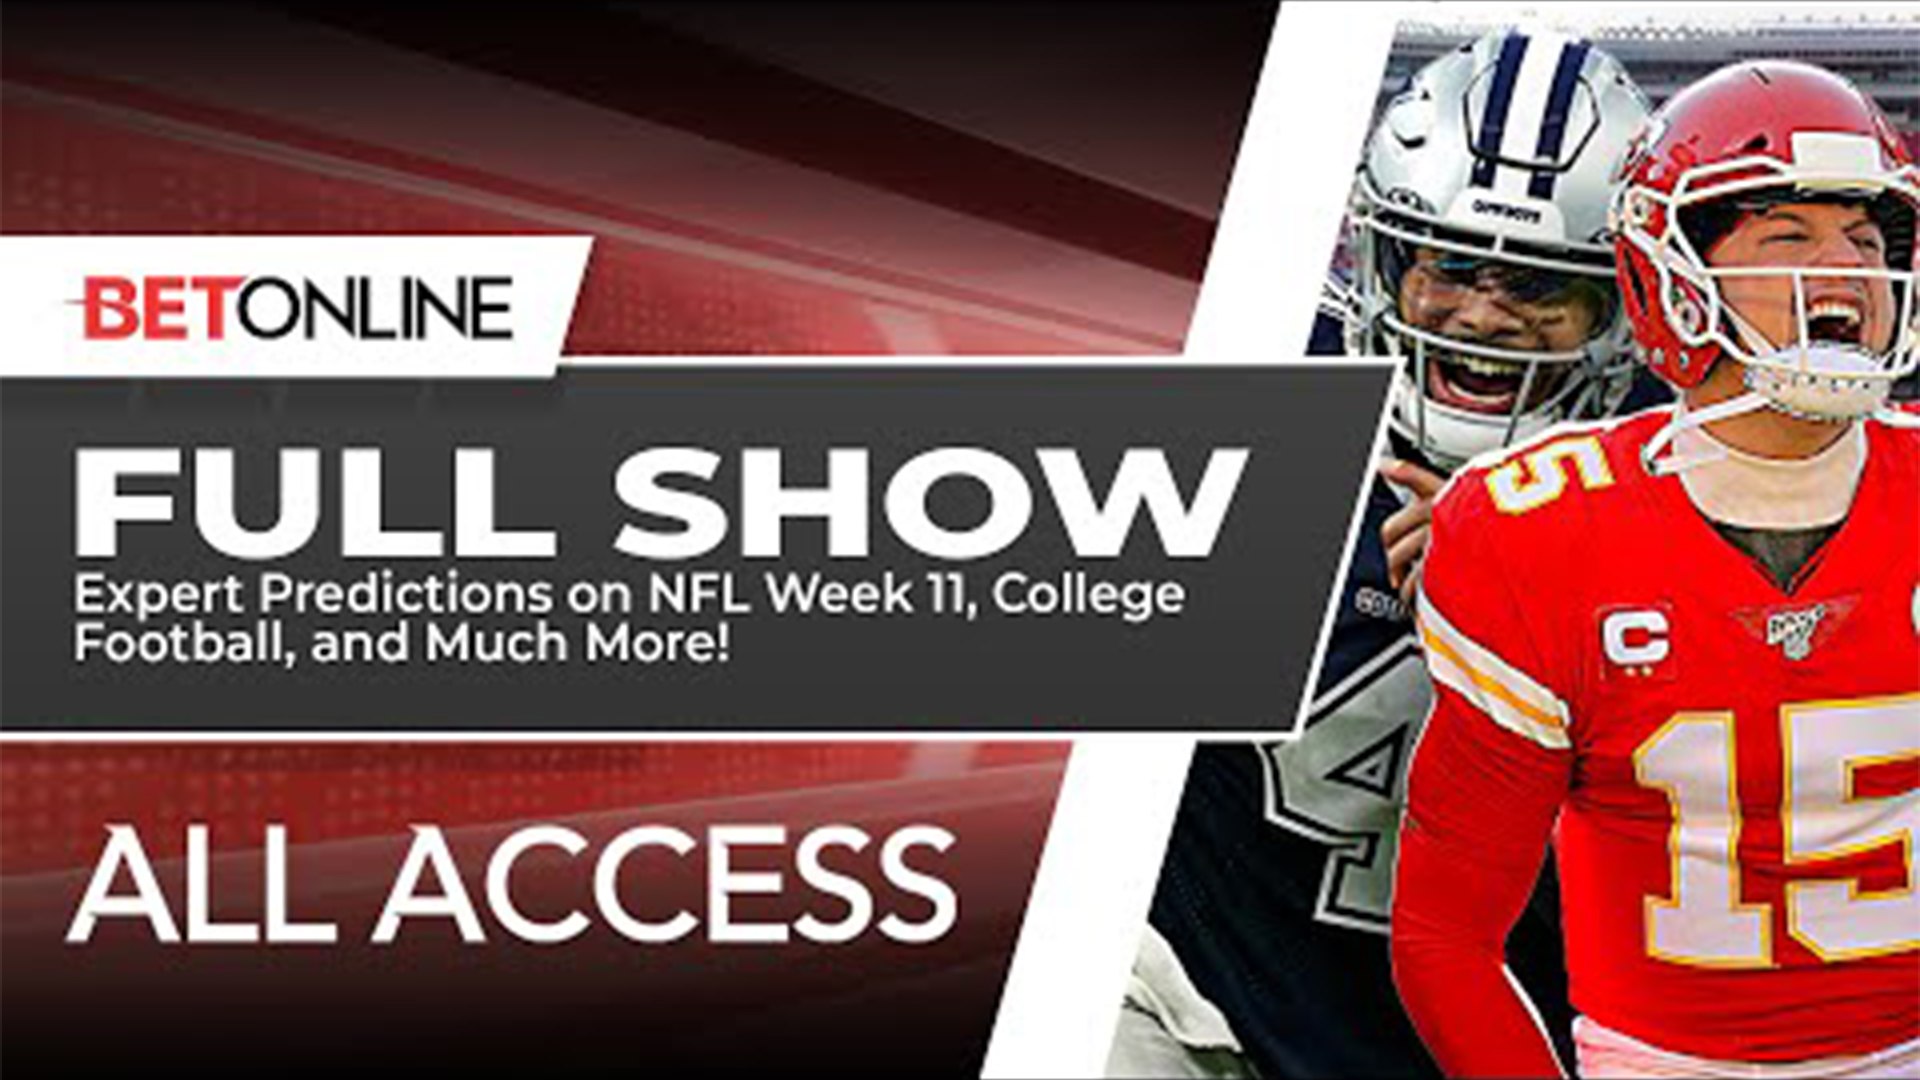 NFL Picks Week 11 + College Football Odds  BetOnline All Access FULL SHOW  - video Dailymotion